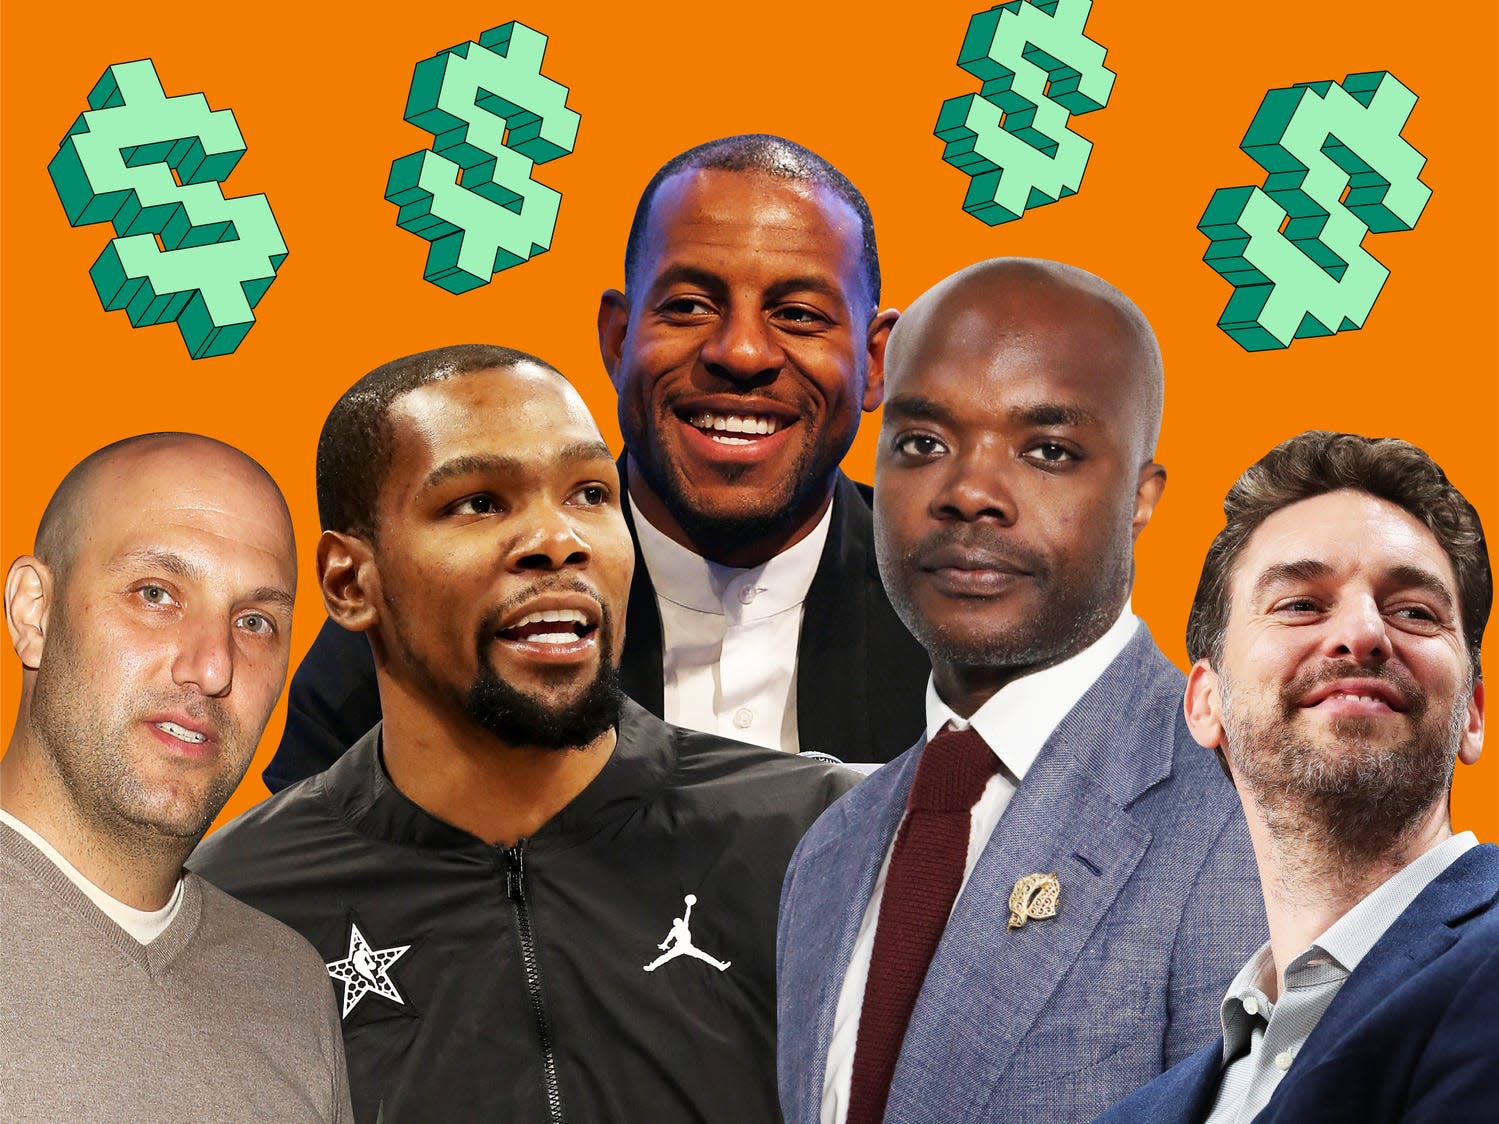 NBA stars like Kevin Durant and Kyle Lowry are increasingly pouring money into startups for the thrill of investing and a chance to break down barriers for people of color